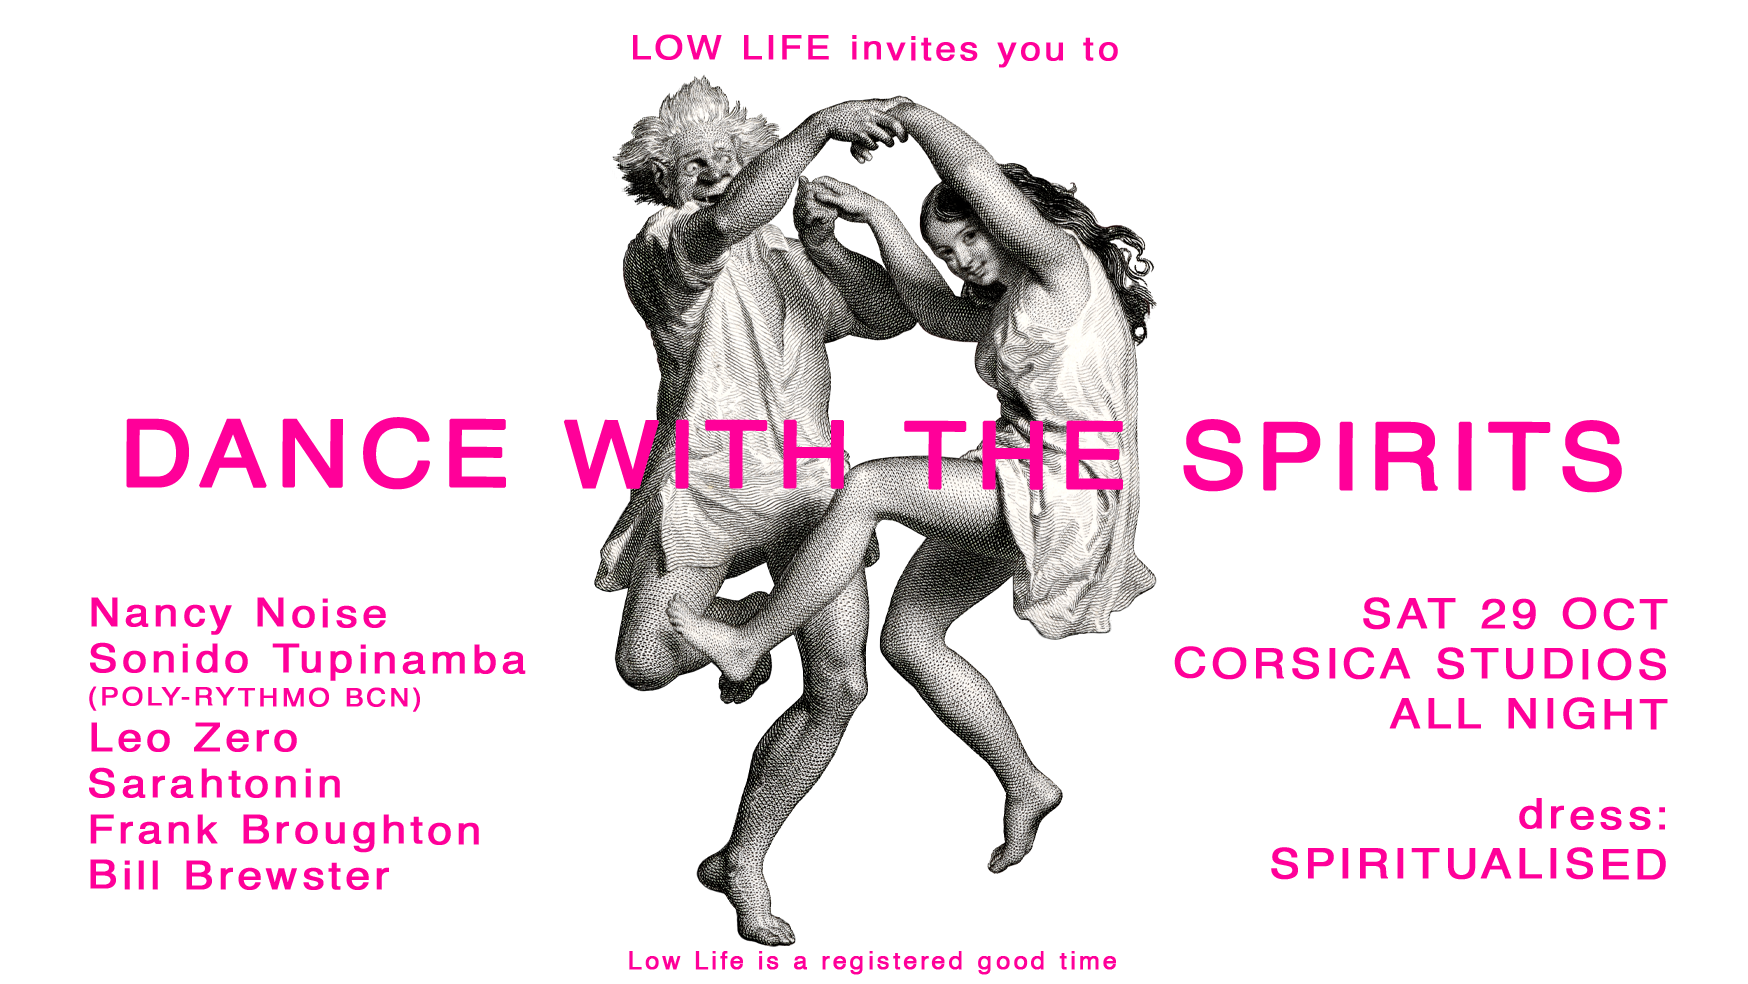 LOW LIFE presents DANCE WITH THE SPIRITS - Flyer front